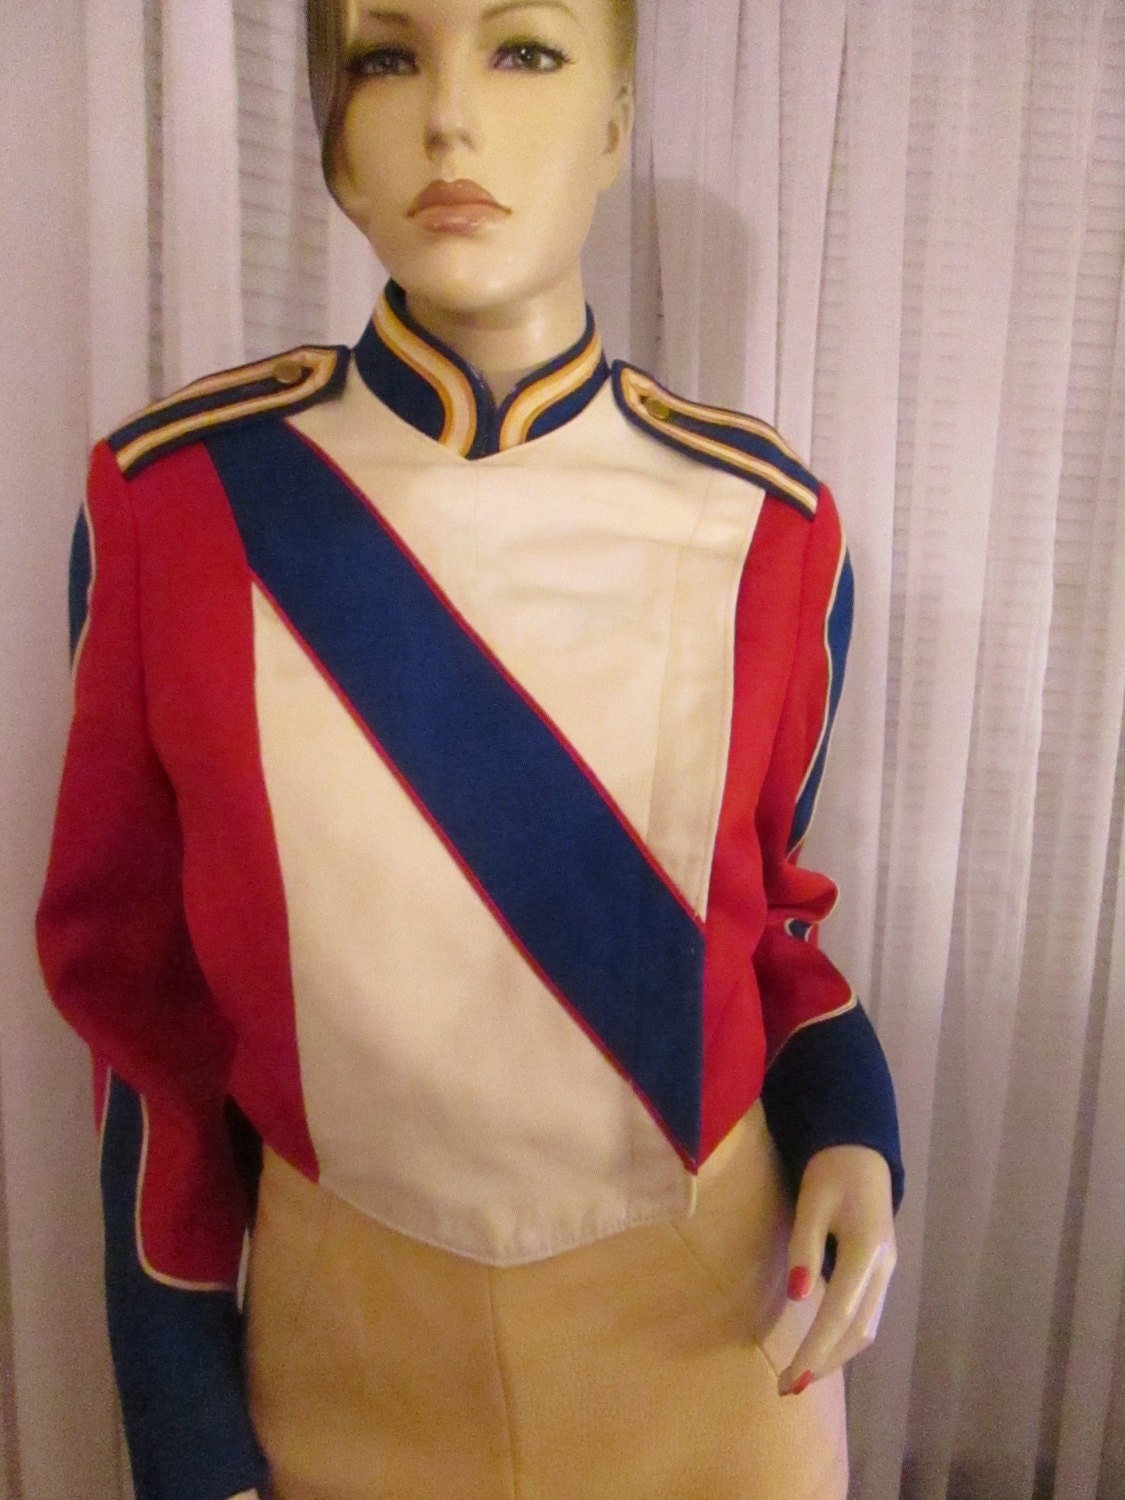 High School MARCHING BAND JACKET 1960s ? Red w/Corded Trim & Added  Embroidery